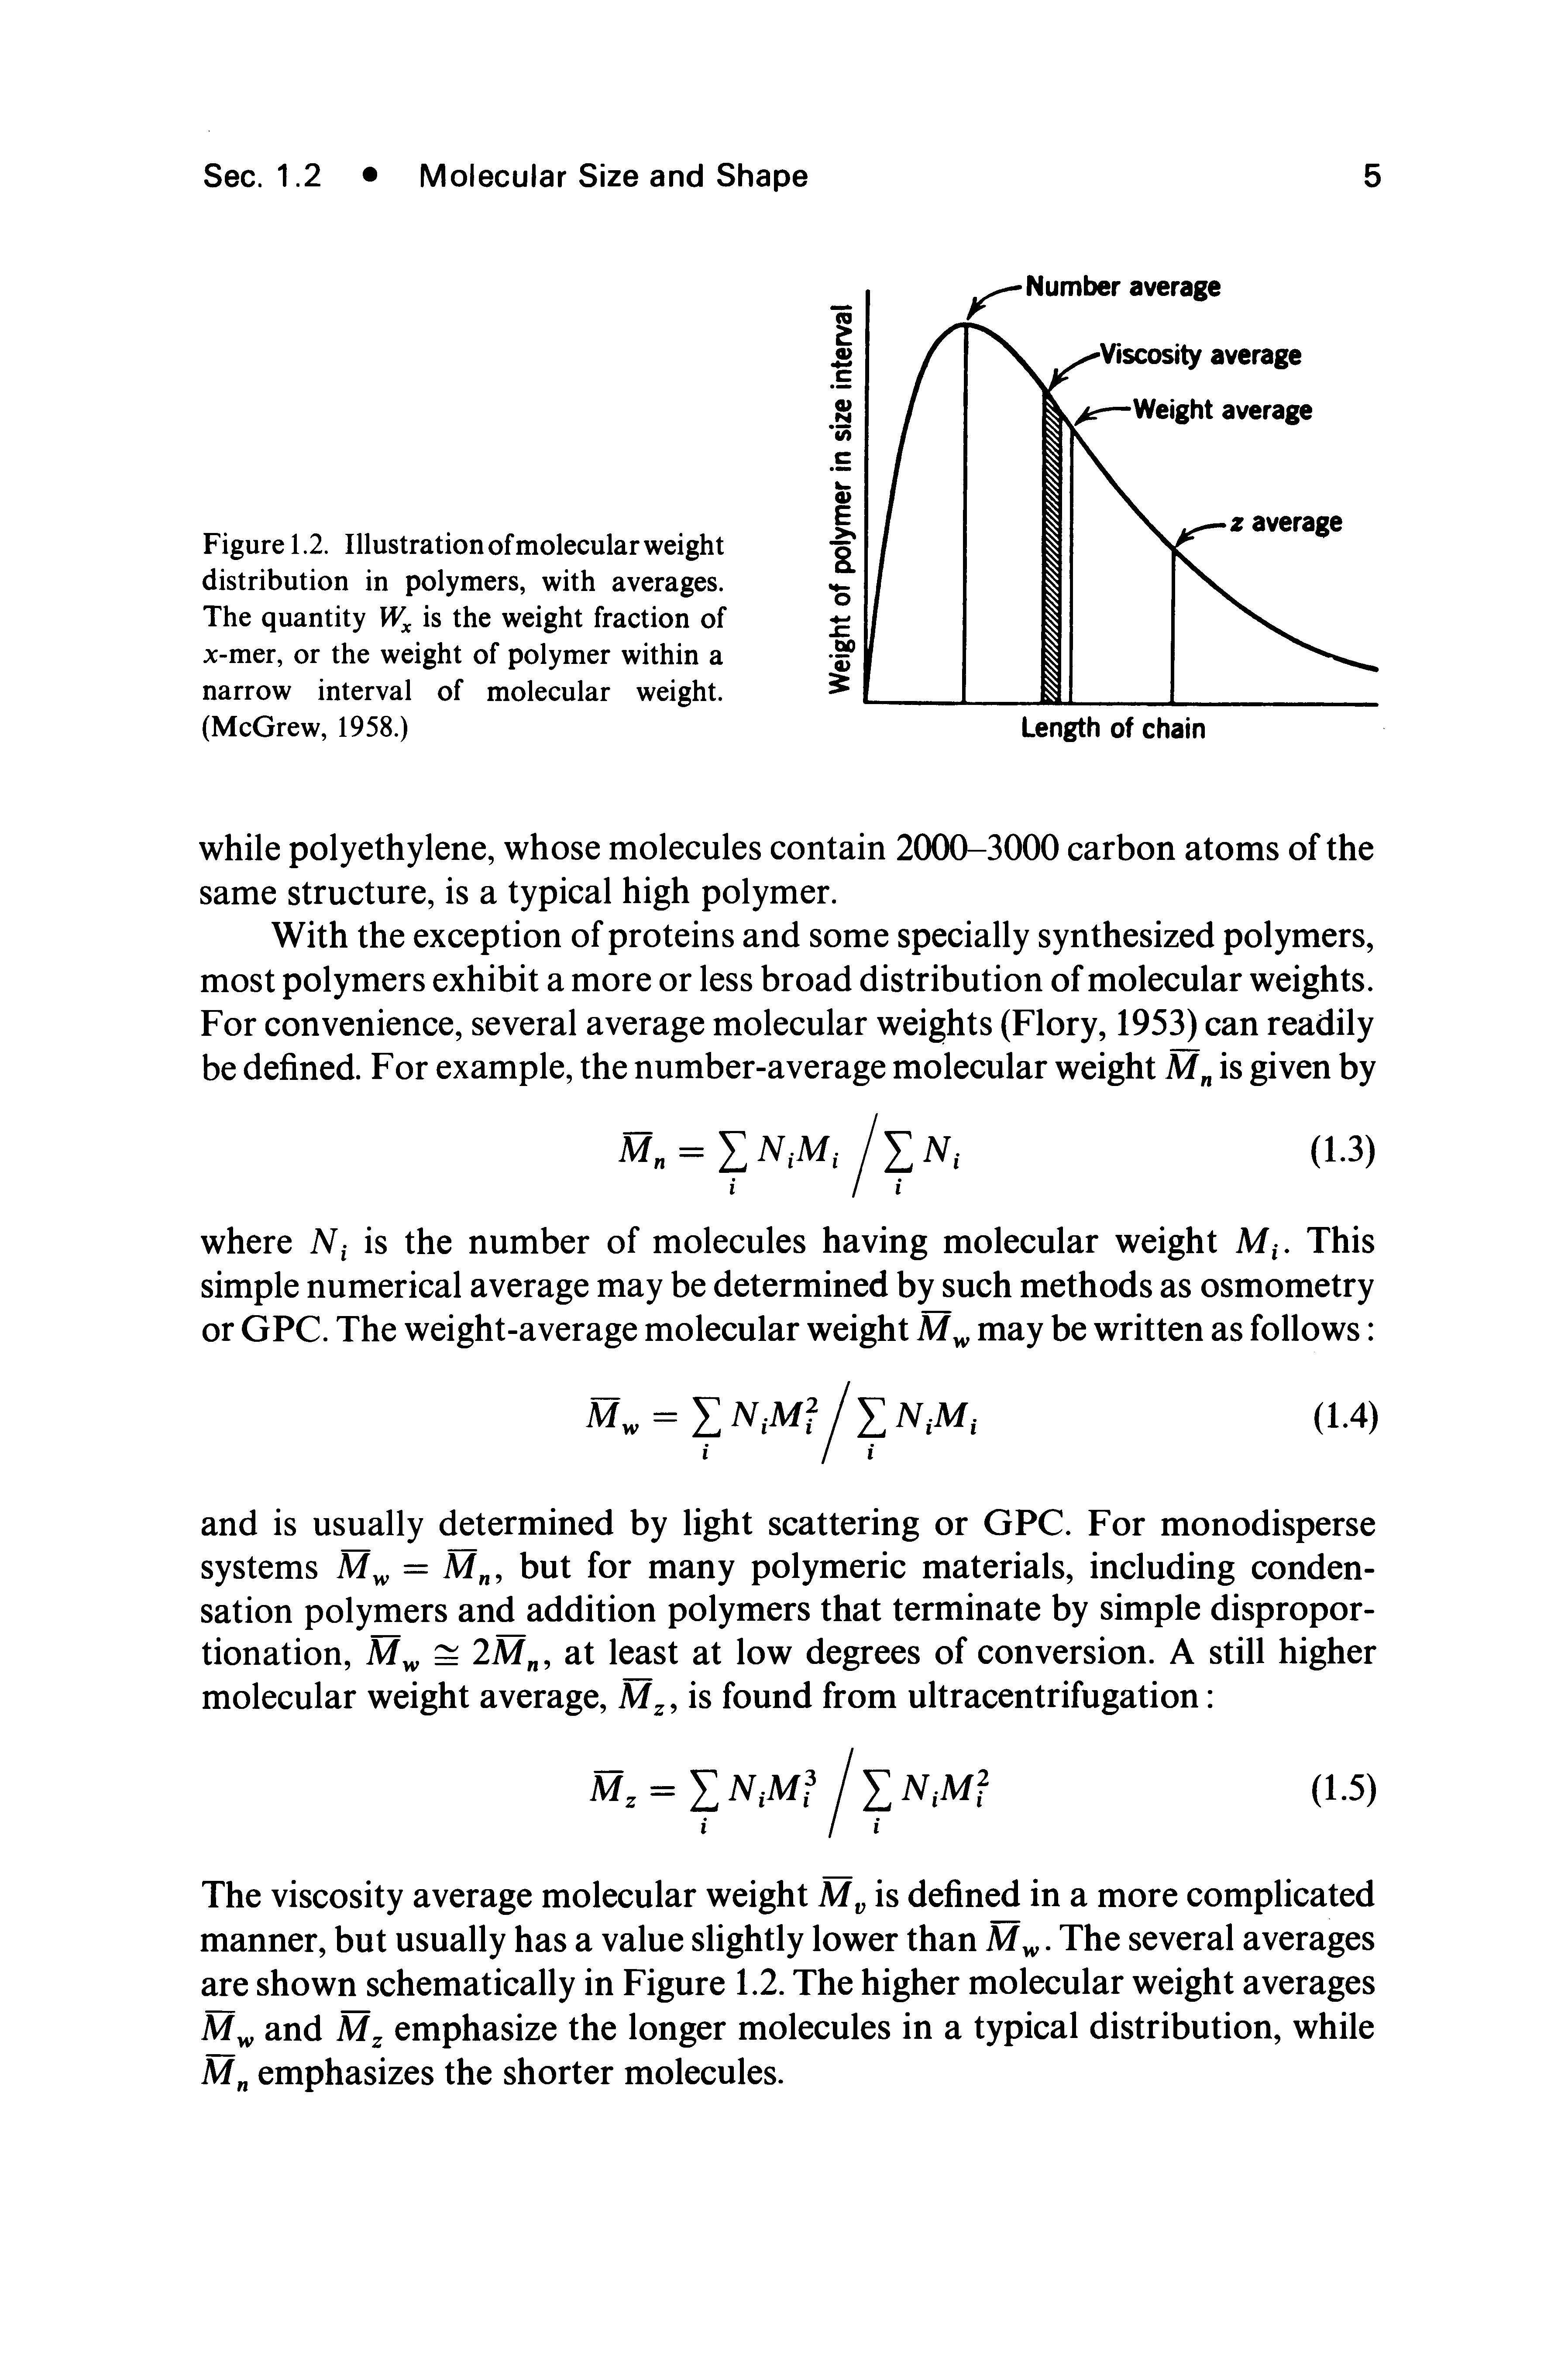 Figure 1.2. Illustration of molecular weight distribution in polymers, with averages. The quantity is the weight fraction of x-mer, or the weight of polymer within a narrow interval of molecular weight. (McGrew, 1958.)...